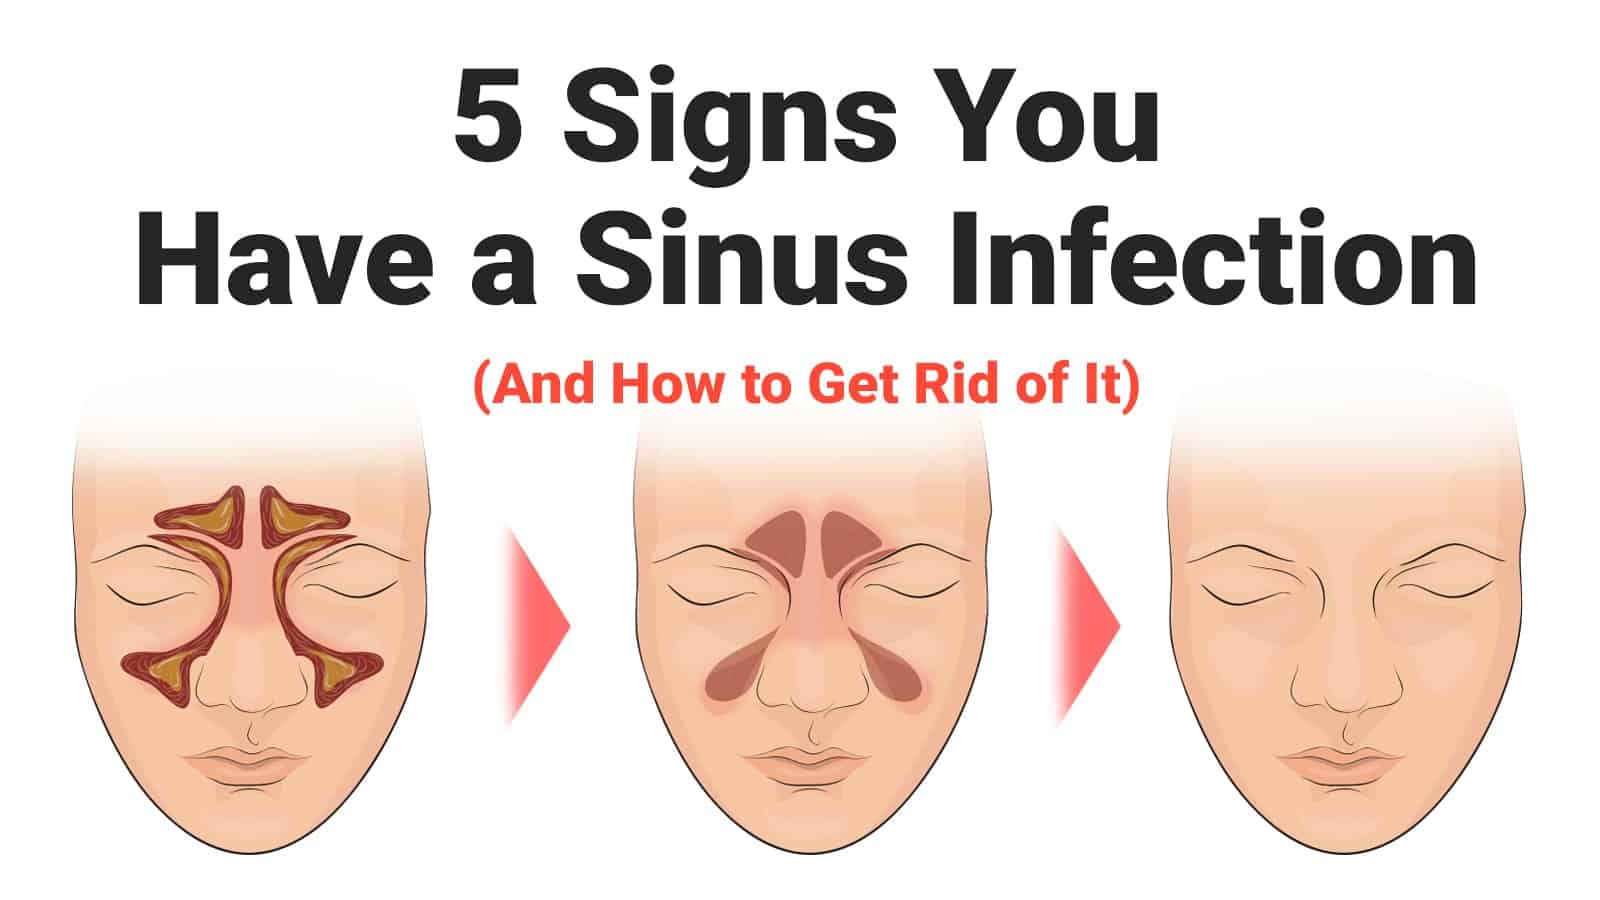 5 Signs You Have a Sinus Infection (And How to Get Rid of It)